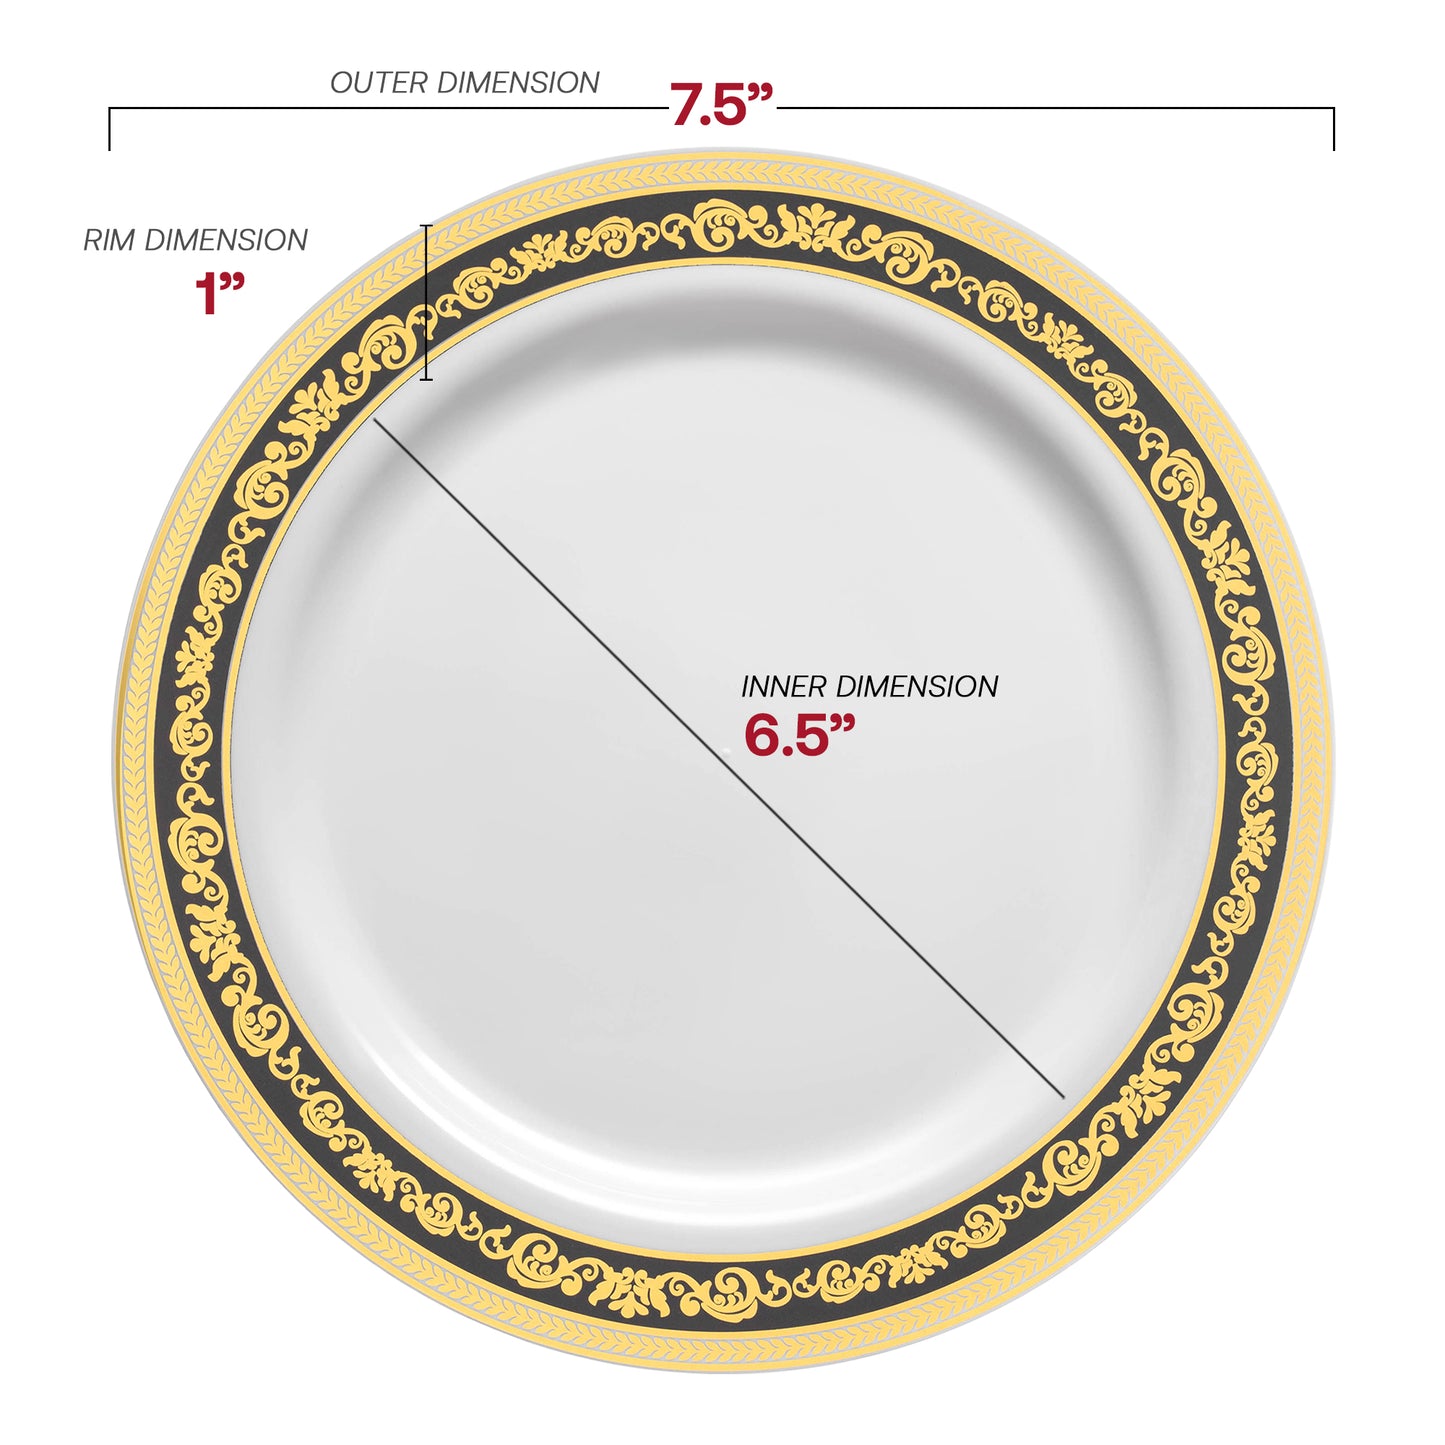 White with Black and Gold Royal Rim Plastic Salad Plates (7.5") Dimension | The Kaya Collection